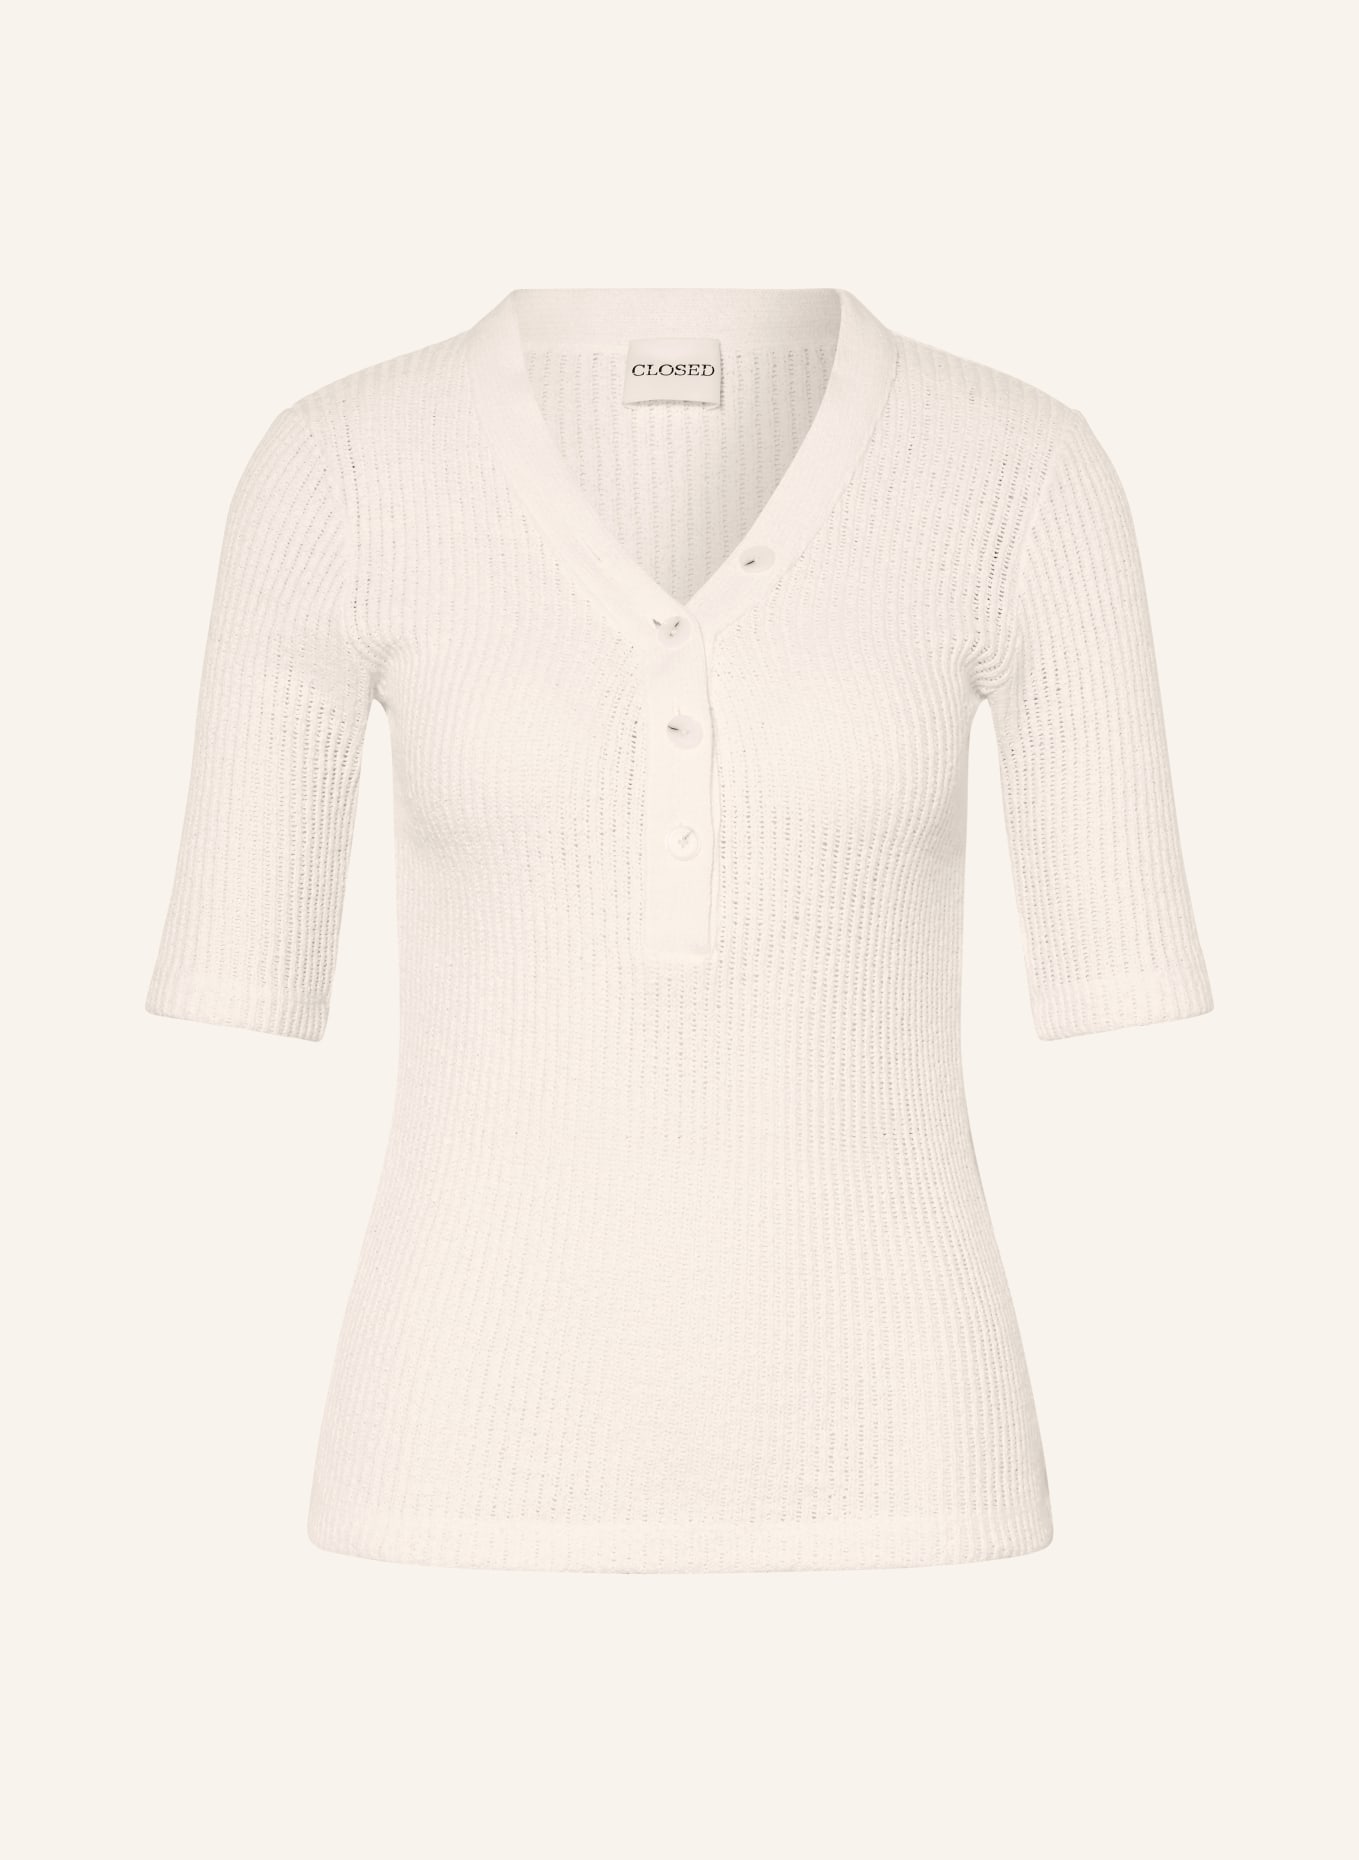 CLOSED Knit shirt, Color: WHITE (Image 1)